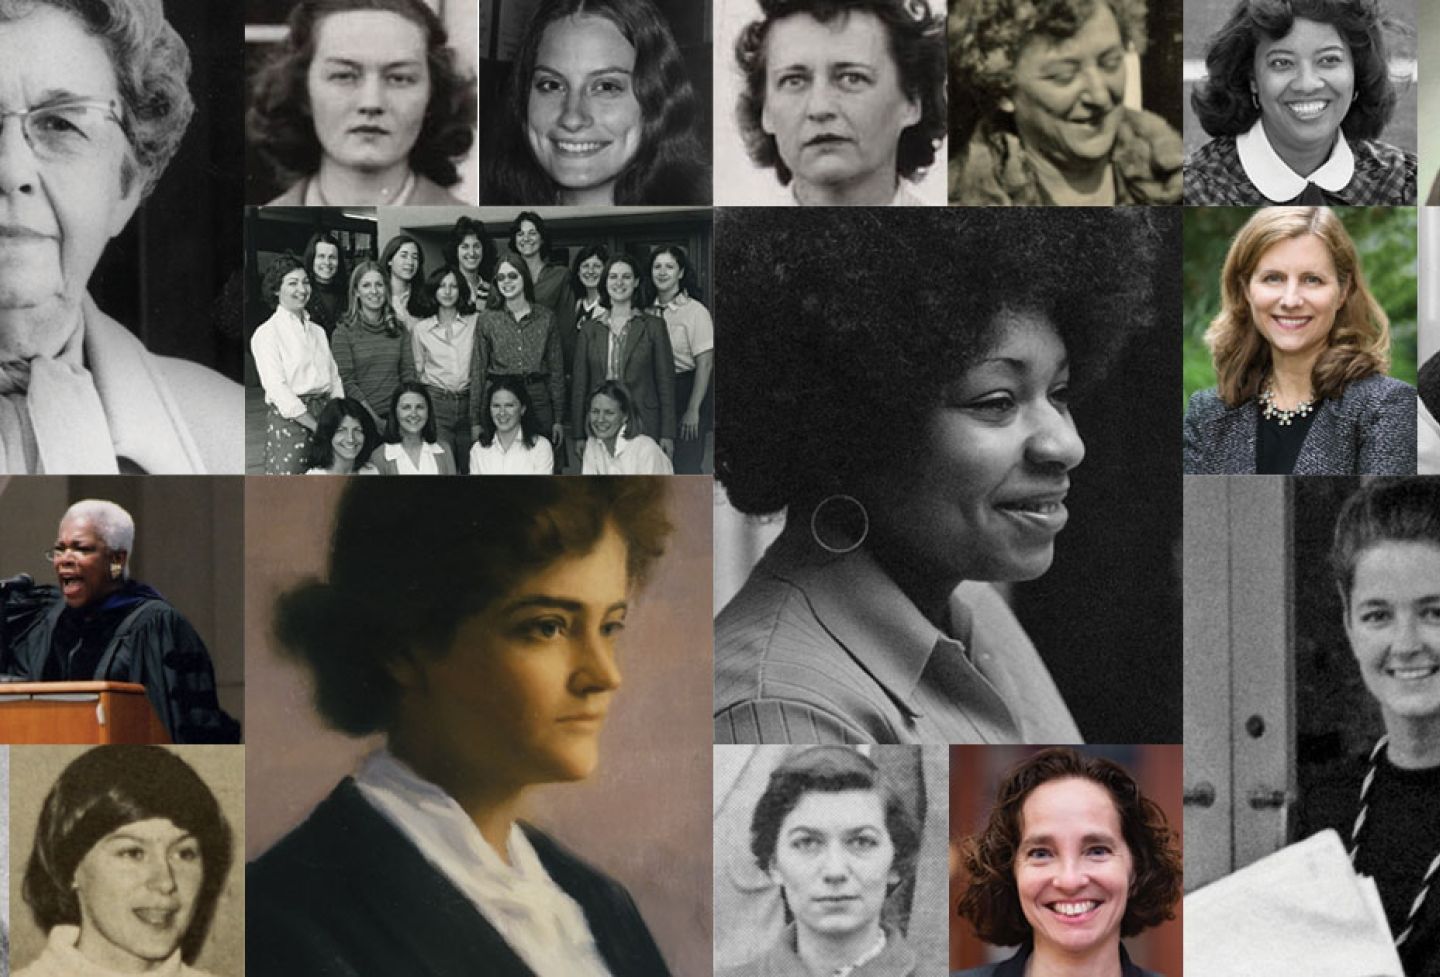 The 2019-20 school year marked the Law School’s bicentennial as well as its centennial of coeducation. The fall 2019 issue of UVA Lawyer showcased women who led the way and who went from lawyers to leaders.